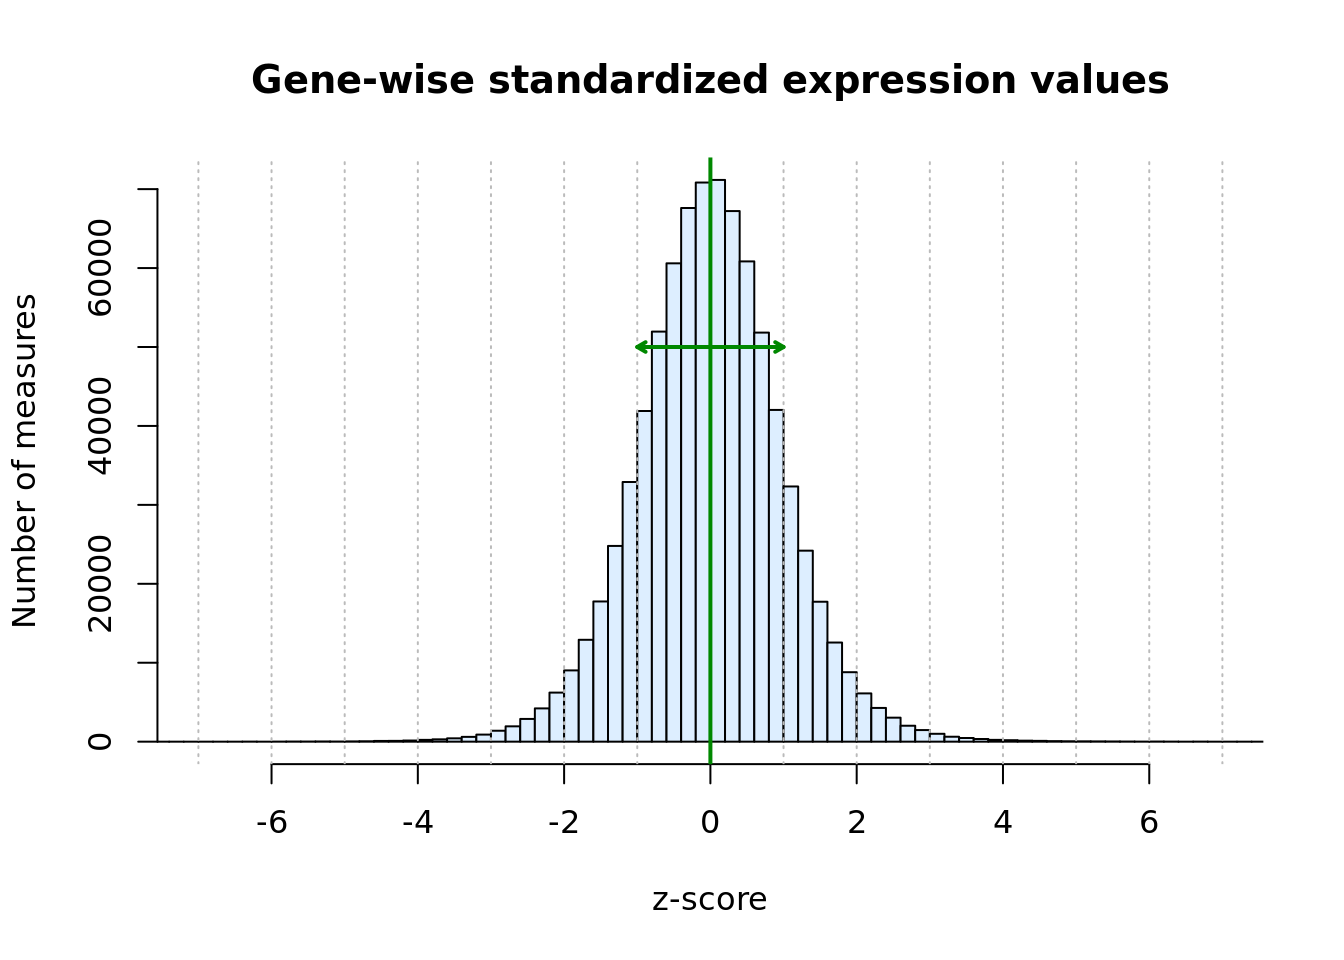 Histogram of expression values after gene-wise standardization (centering and scaling).